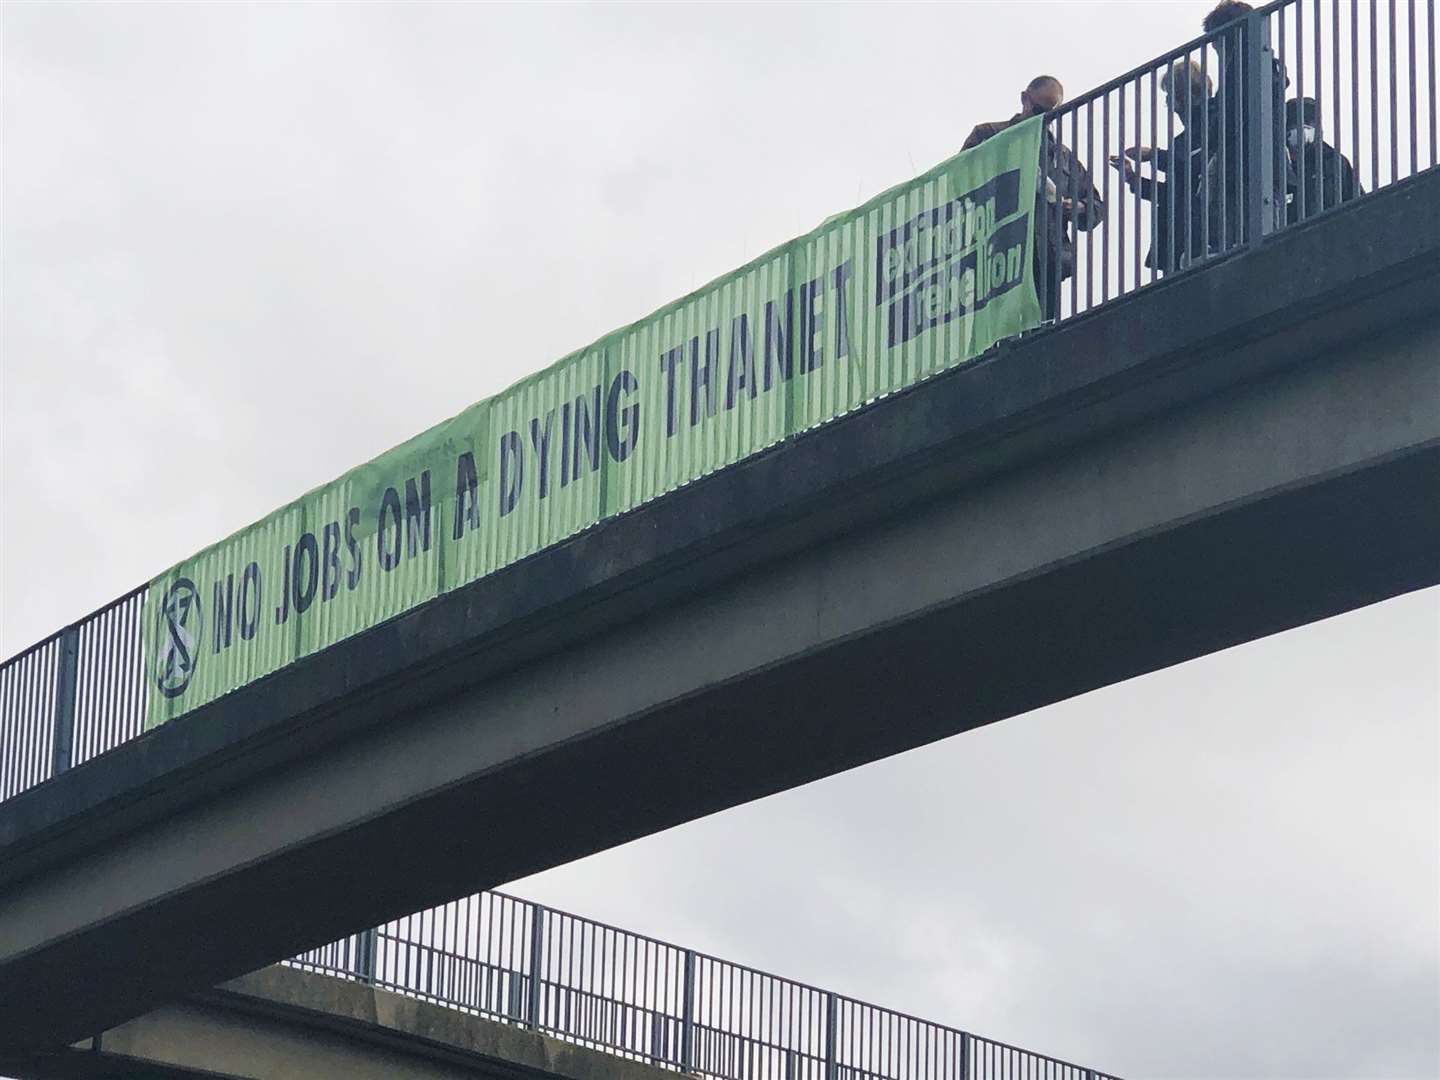 A banner protesting the plans to reopen Manston Airport as part of Extinction Rebellion's raft of campaigns this weekend